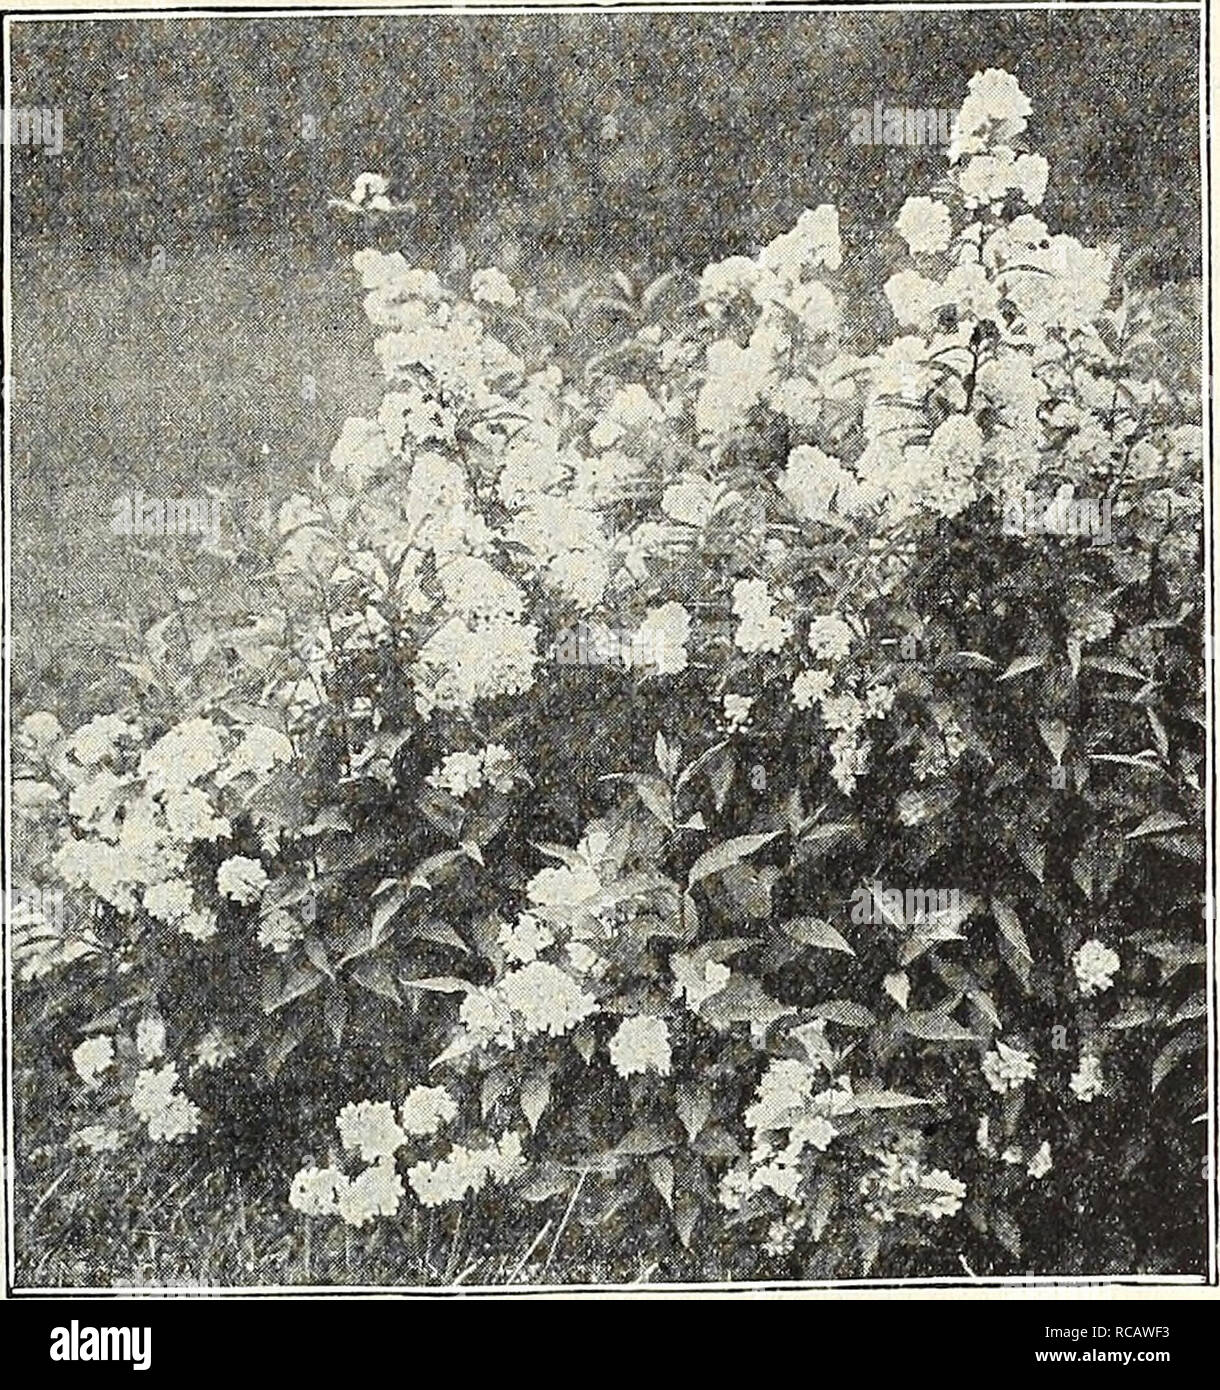 . Dreer's autumn catalogue 1931. Bulbs (Plants) Catalogs; Flowers Seeds Catalogs; Gardening Equipment and supplies Catalogs; Nurseries (Horticulture) Catalogs; Vegetables Seeds Catalogs. h CHOICE HARDY SHRUBS ralifflfl 65. Deutzia Lemoinei ESeagOtlS (Japanese Oleaster) Longipes. A very desin ble, nearly evergreen Shrub of medium height, with light foliage, which is silvered on the under surface. The abundant crop of orange-colored fruit is a very attractive feature during the summer. 75 cts. each. Elsholtzia (Mintshrub) Stauntoni. Its.late flowering, September and October, makes this a particu Stock Photo